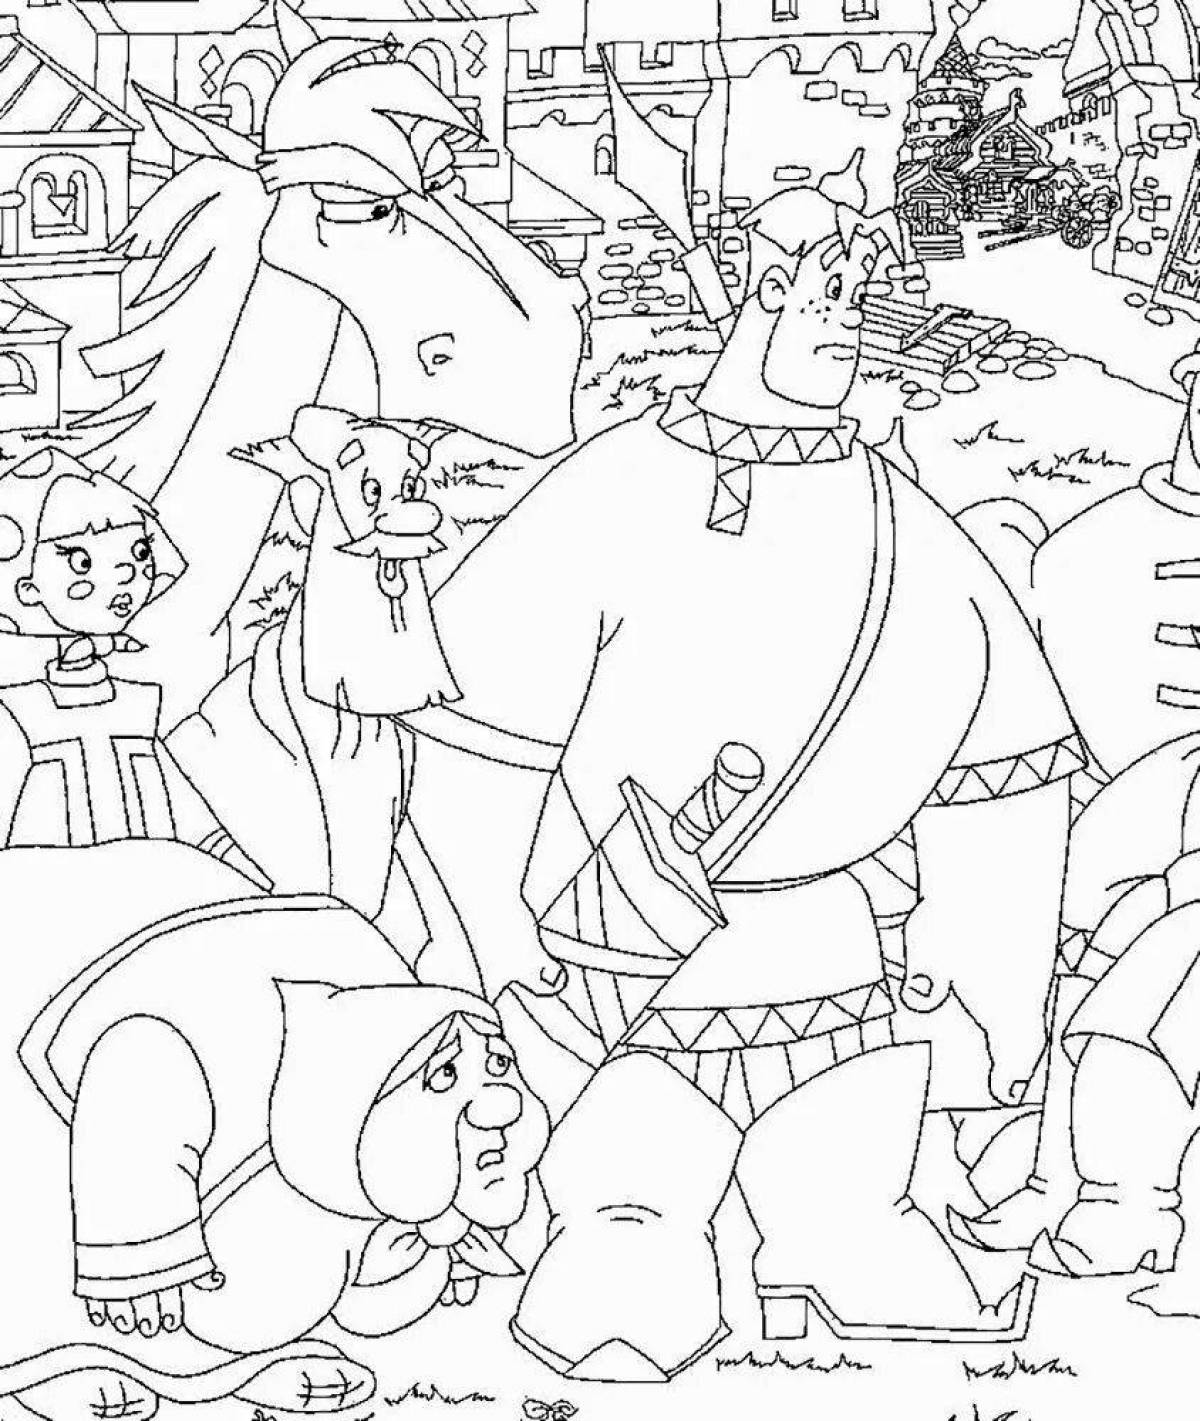 Lubava coloring book filled with colors